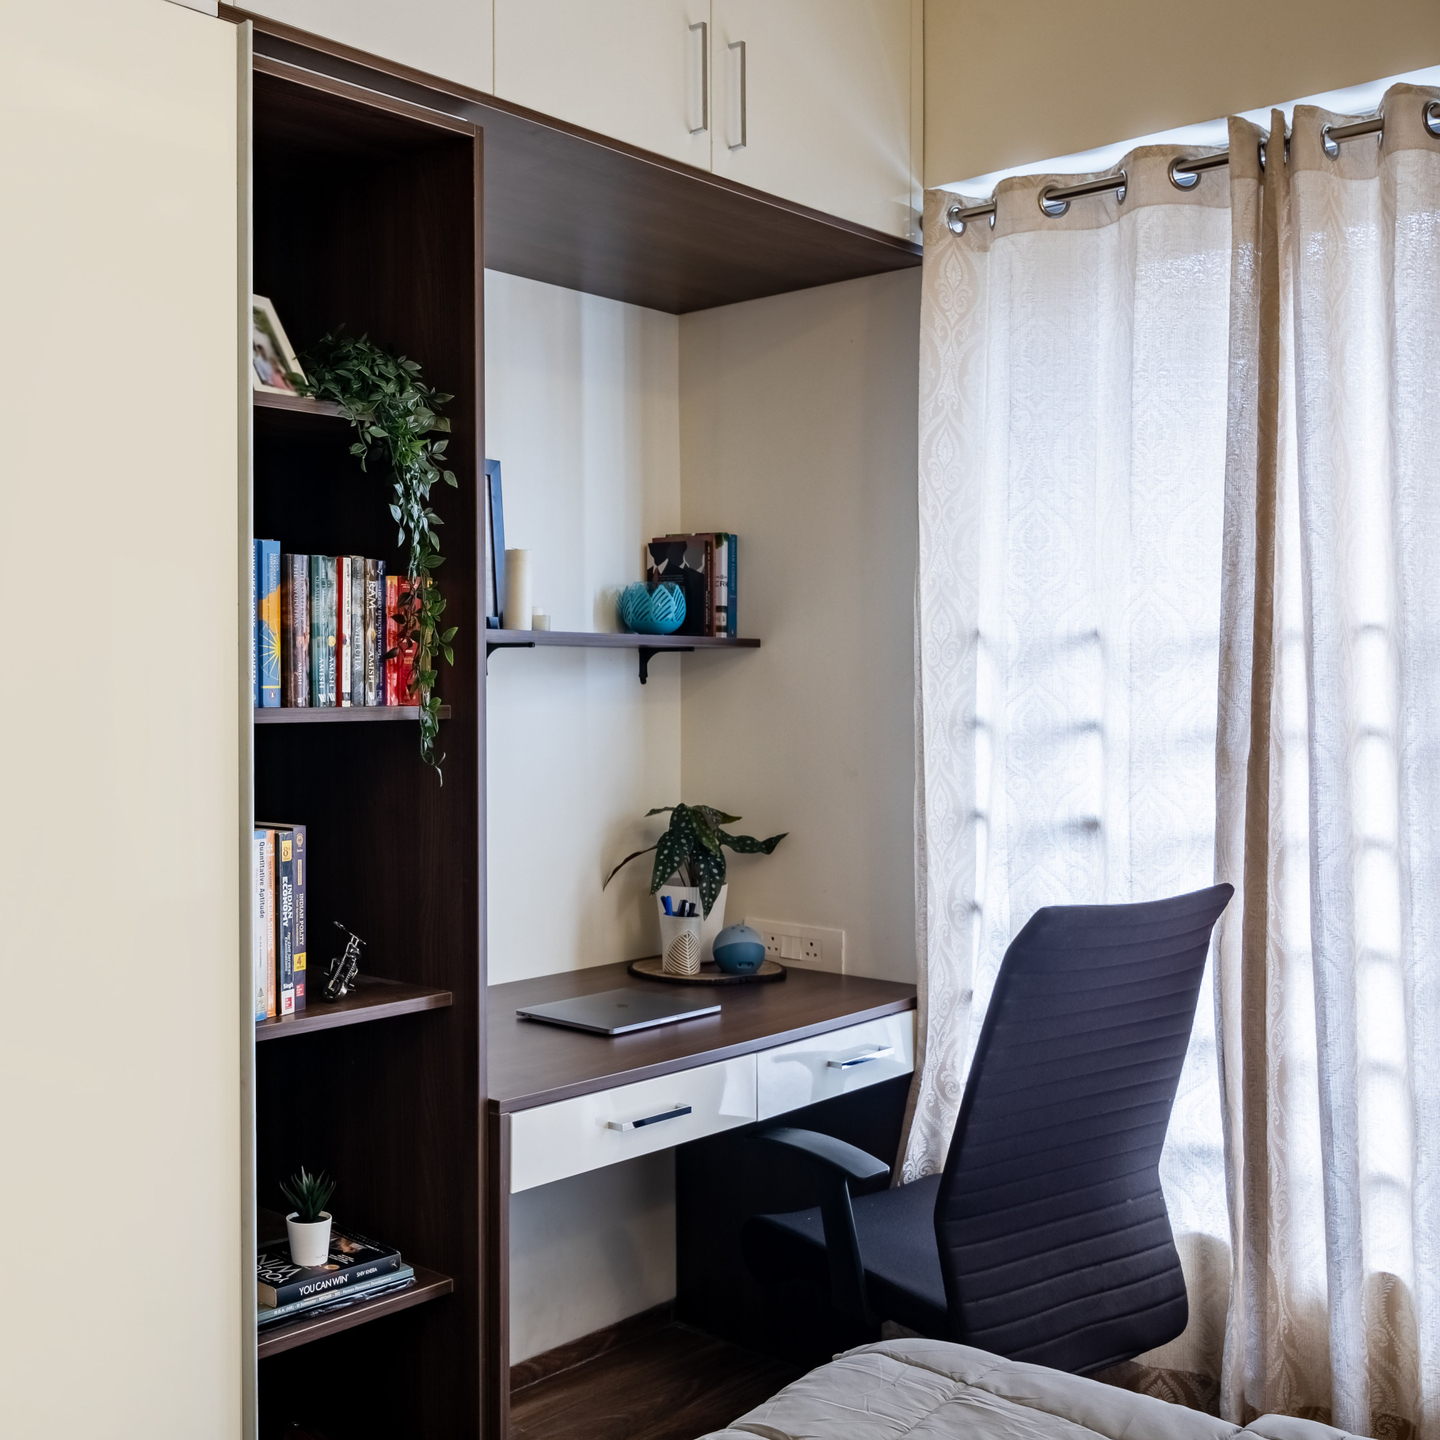 Home Office With A Tall Bookshelf - Livspace